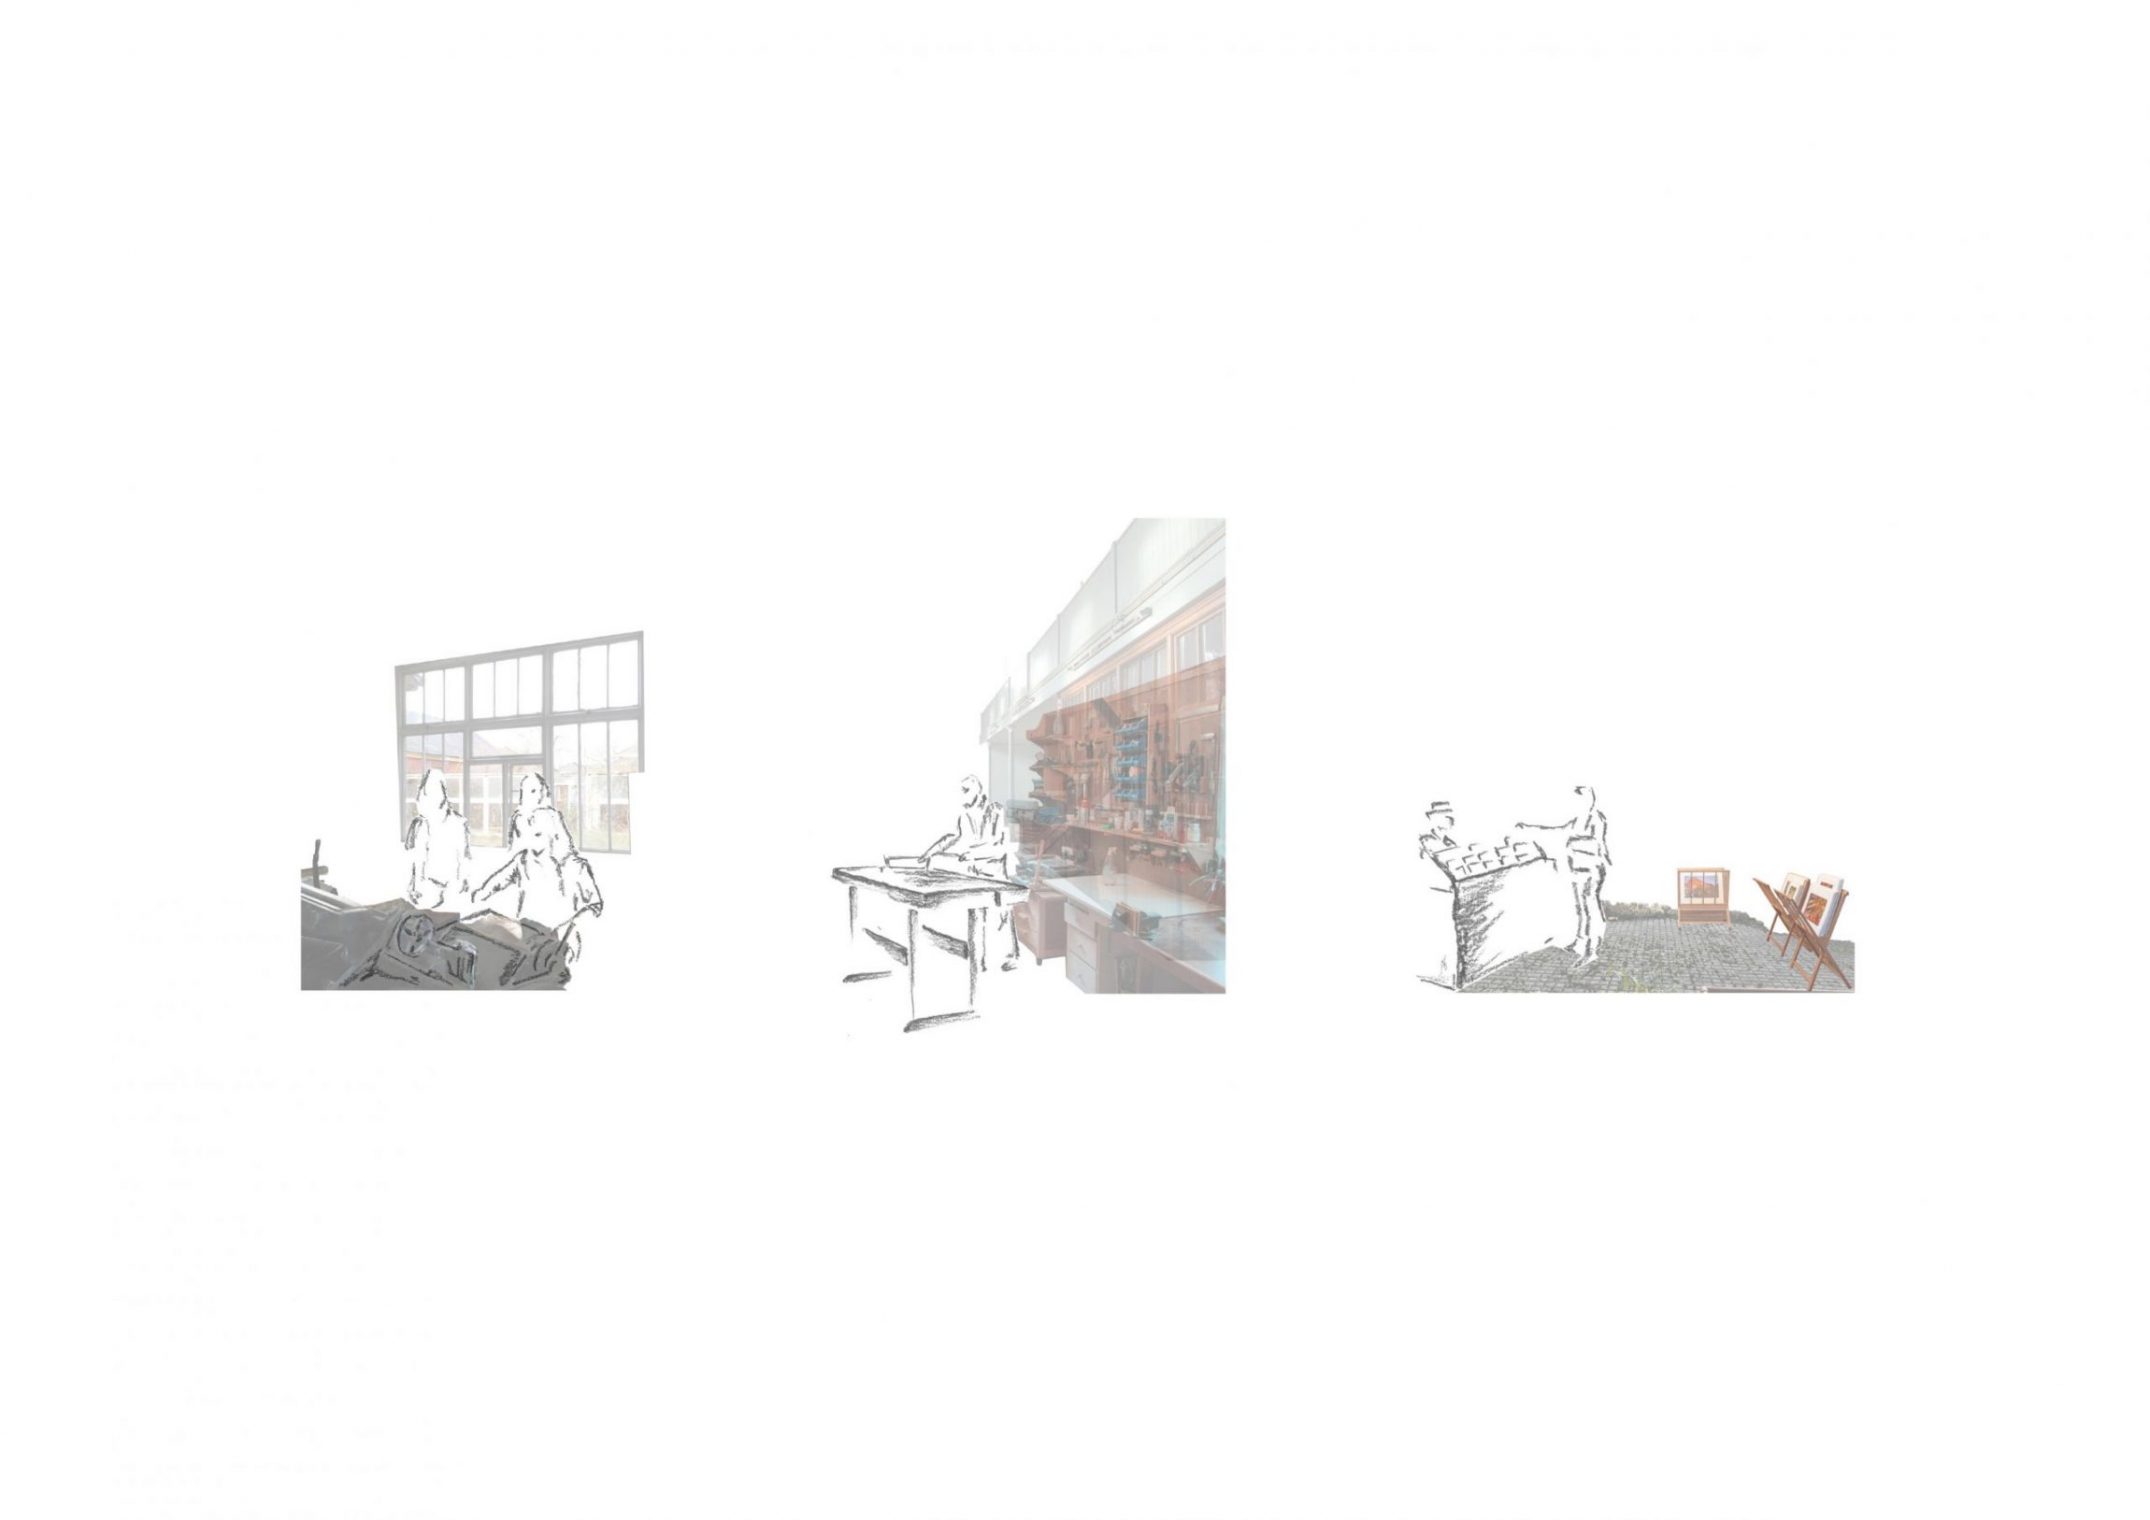 Three perspective drawings showing the activities available at the proposed Artists Resident Scheme at Whitchurch.